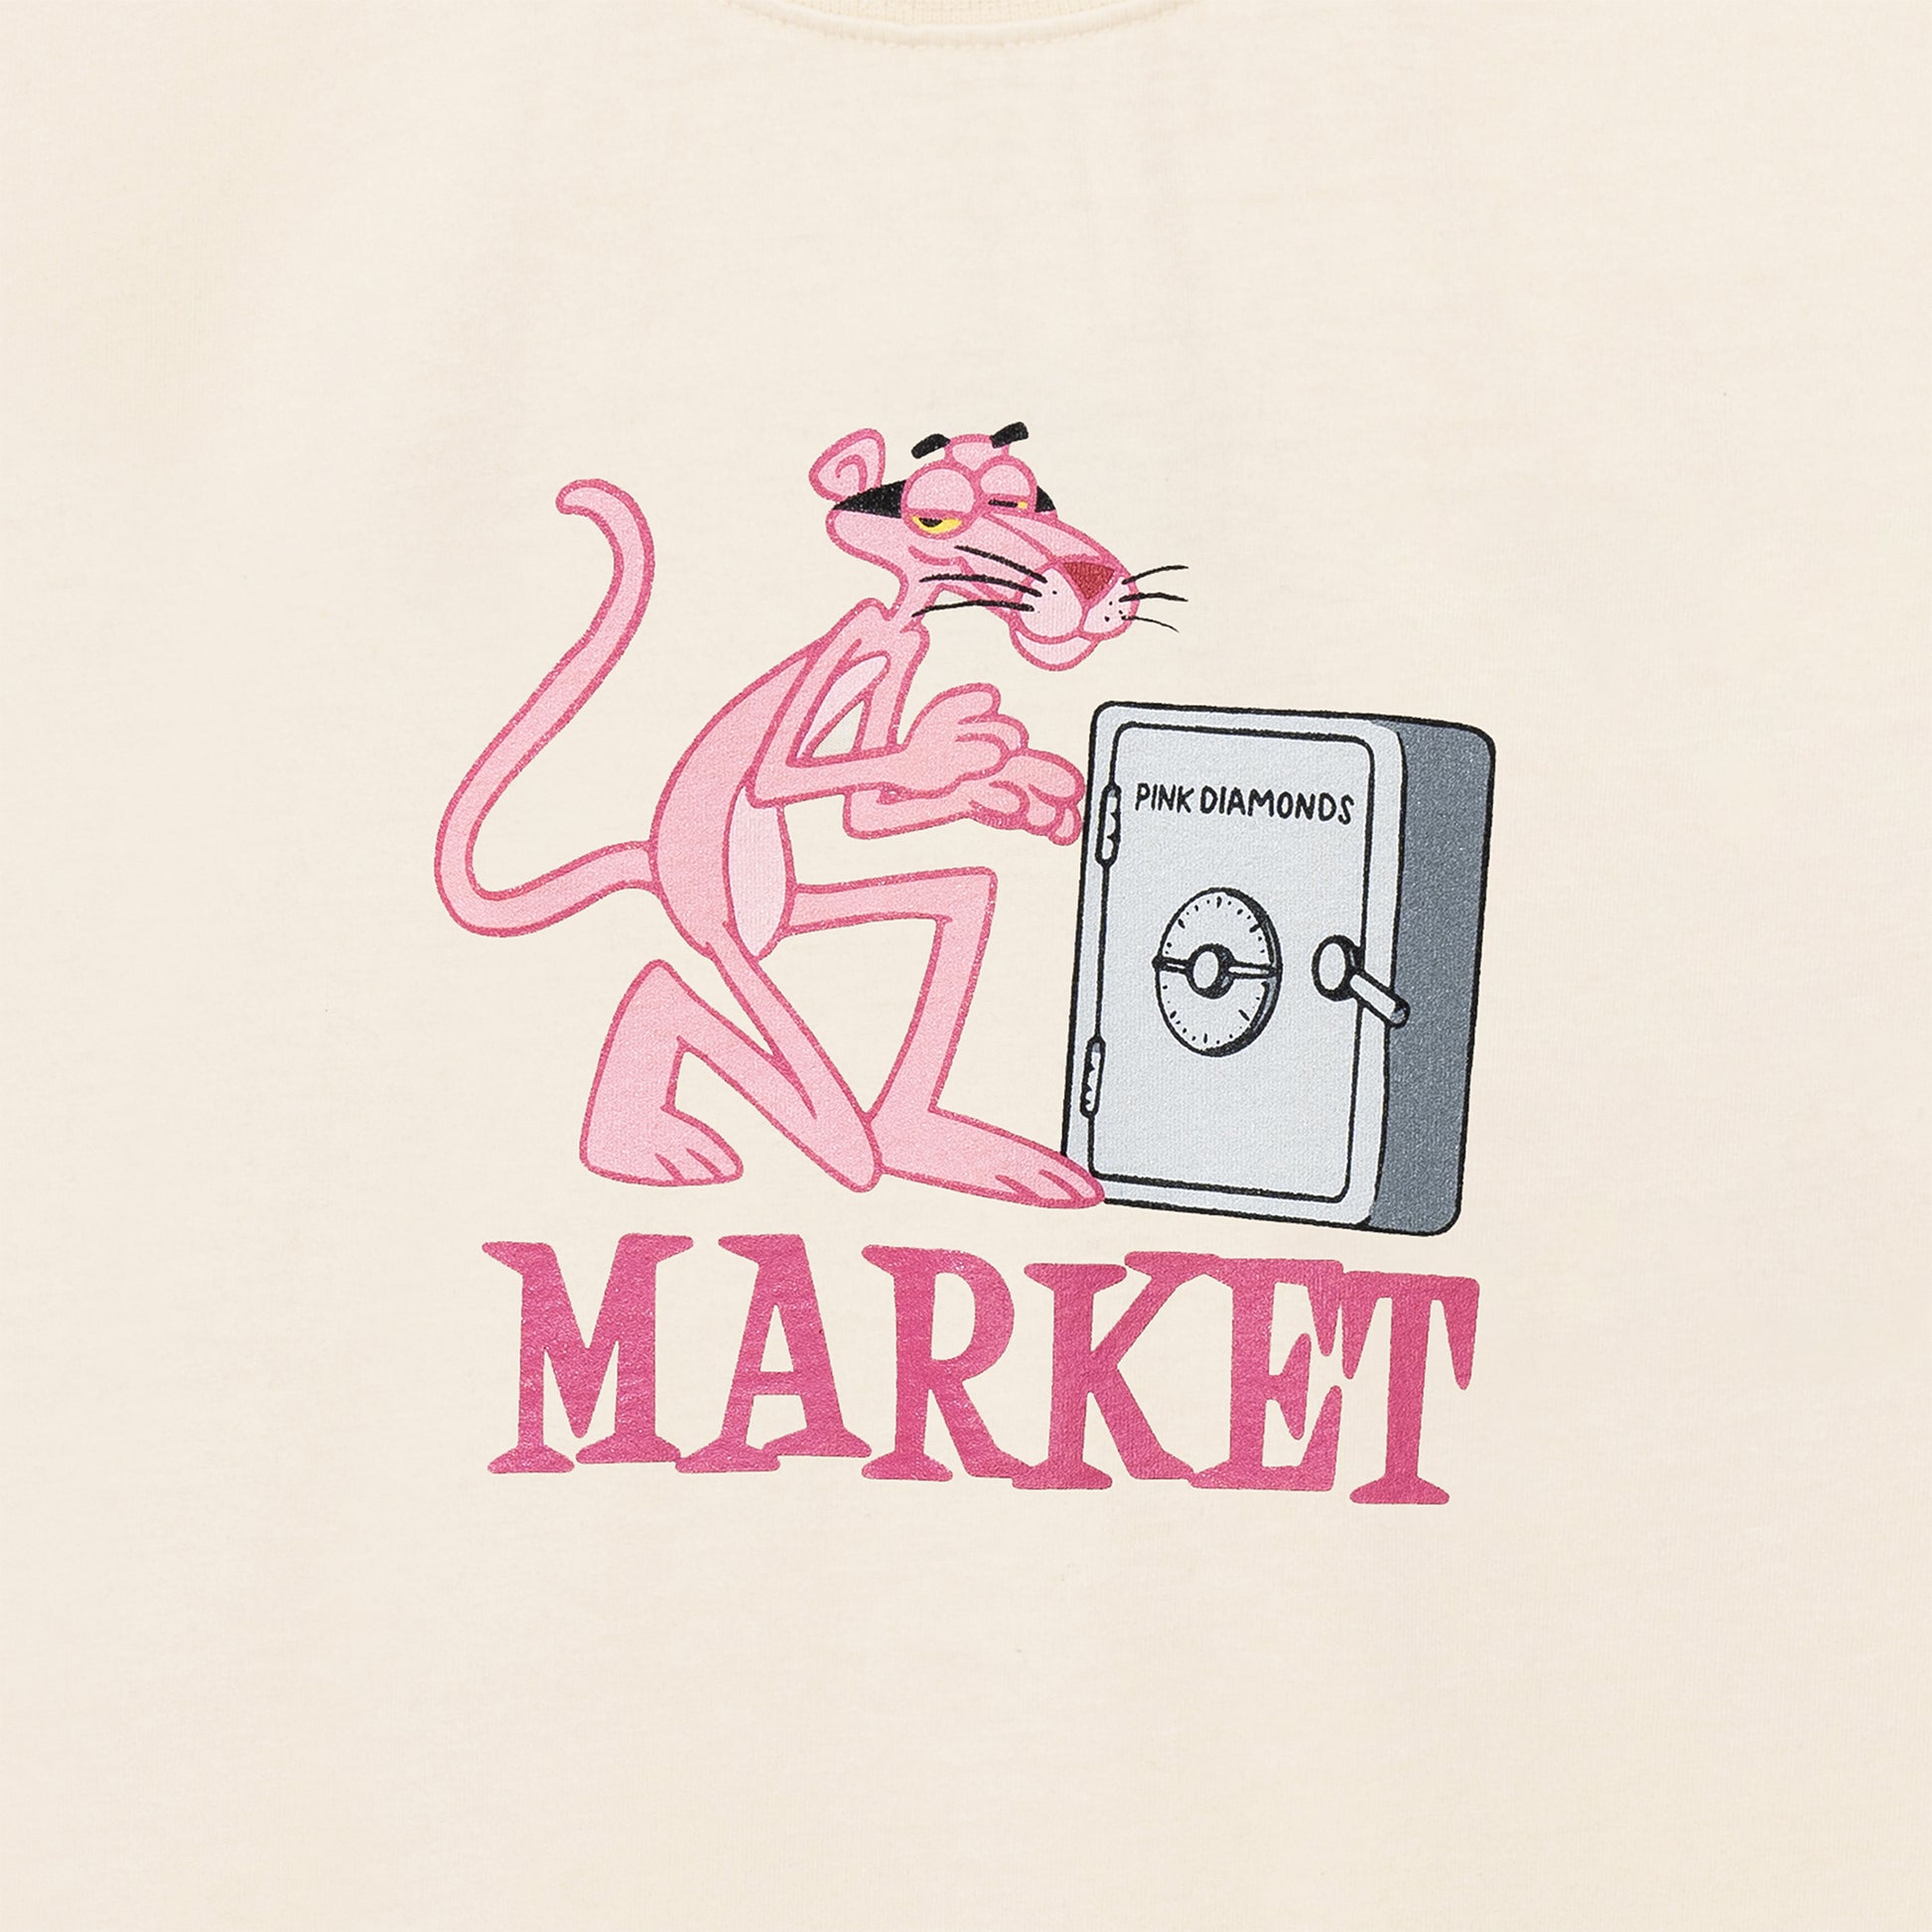 Call My Lawyer graphic-print joggers, MARKET